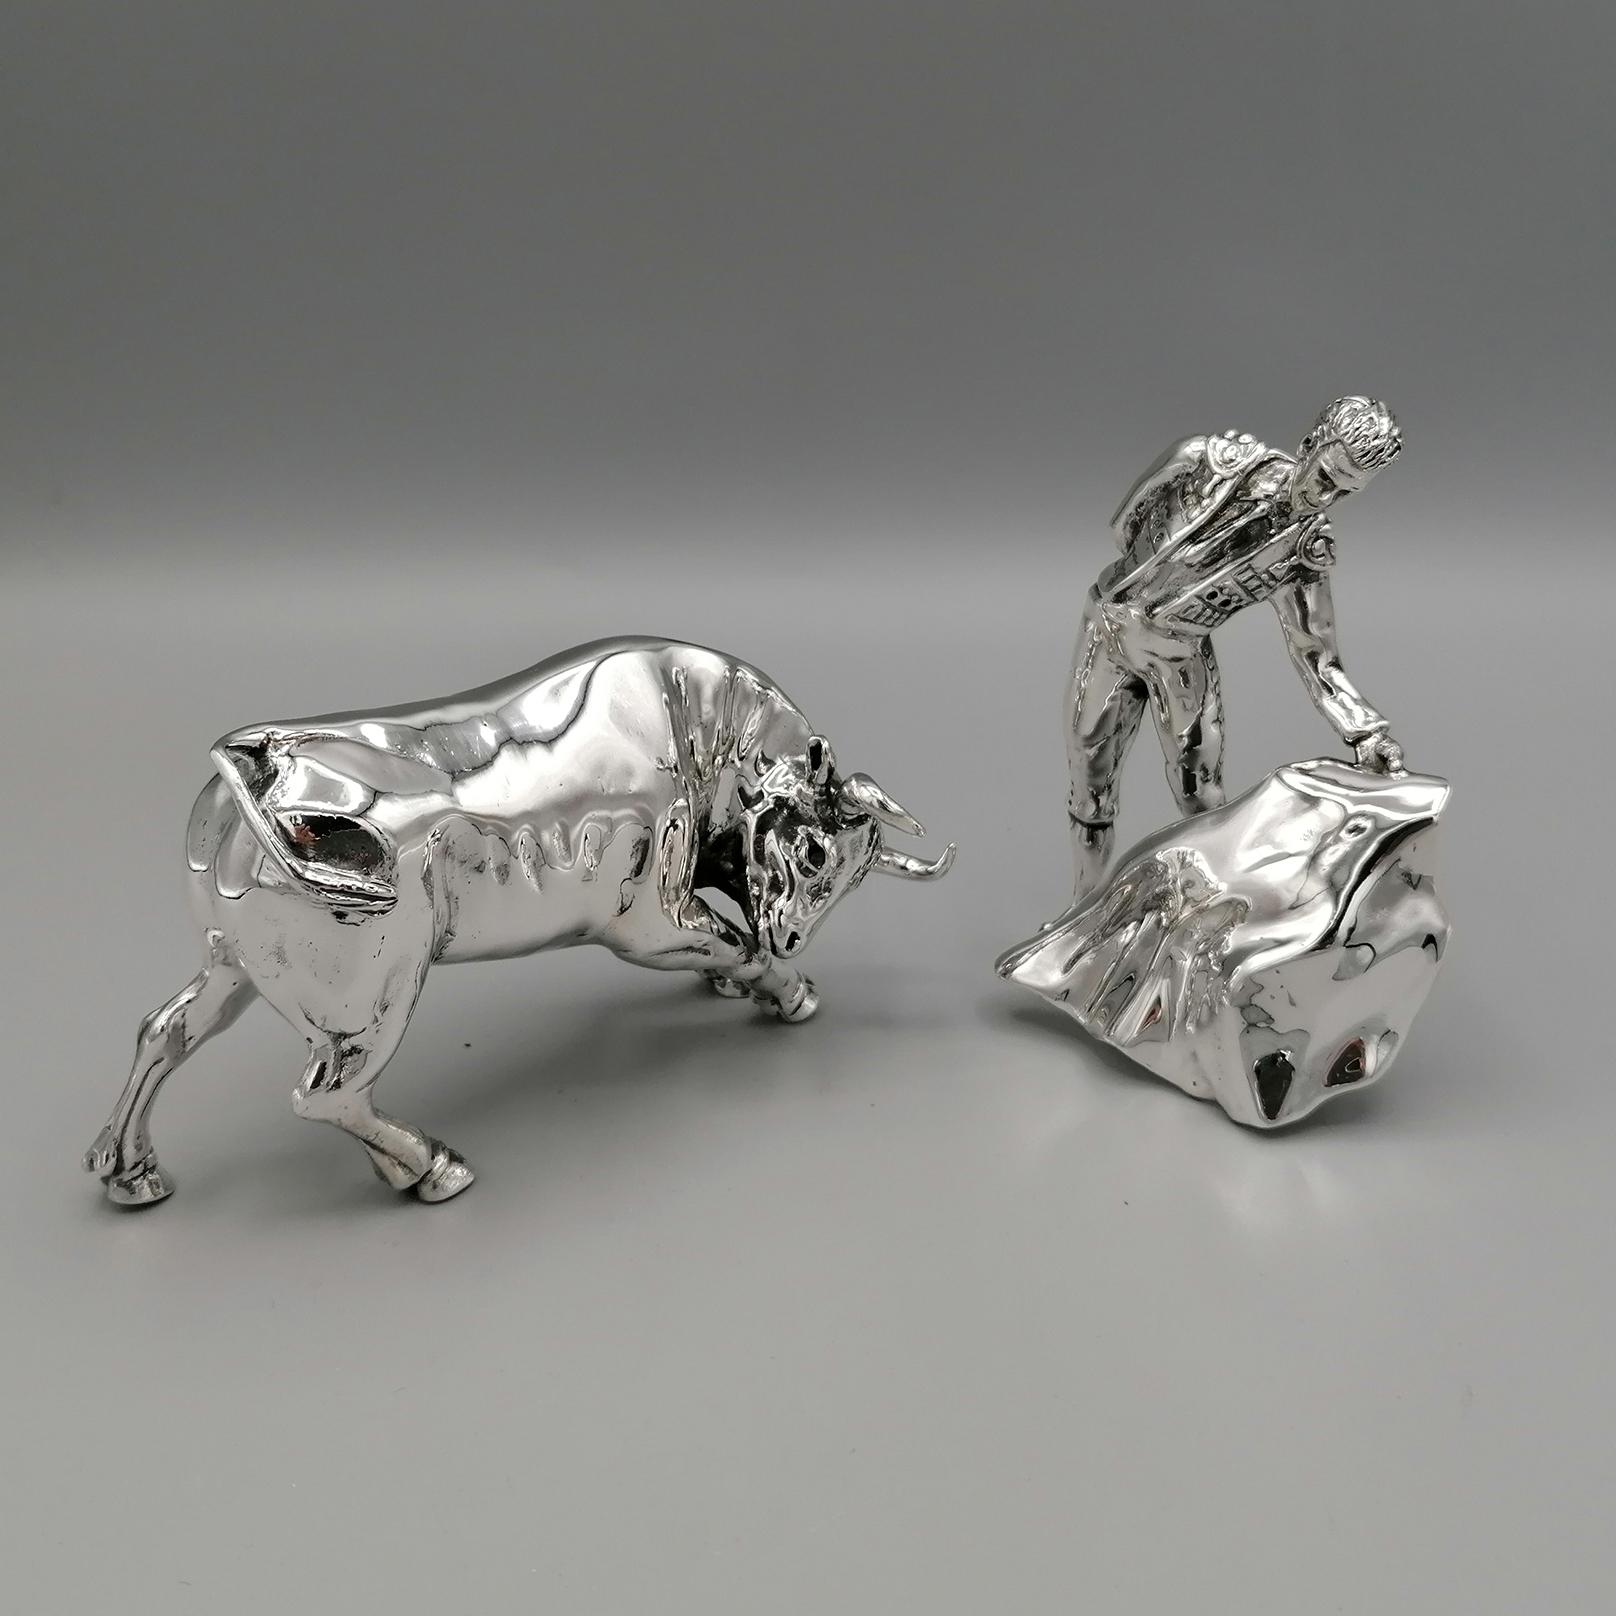 20th Century Italian Sterling Siver Bull and Bullfighter Sculpture For Sale 5